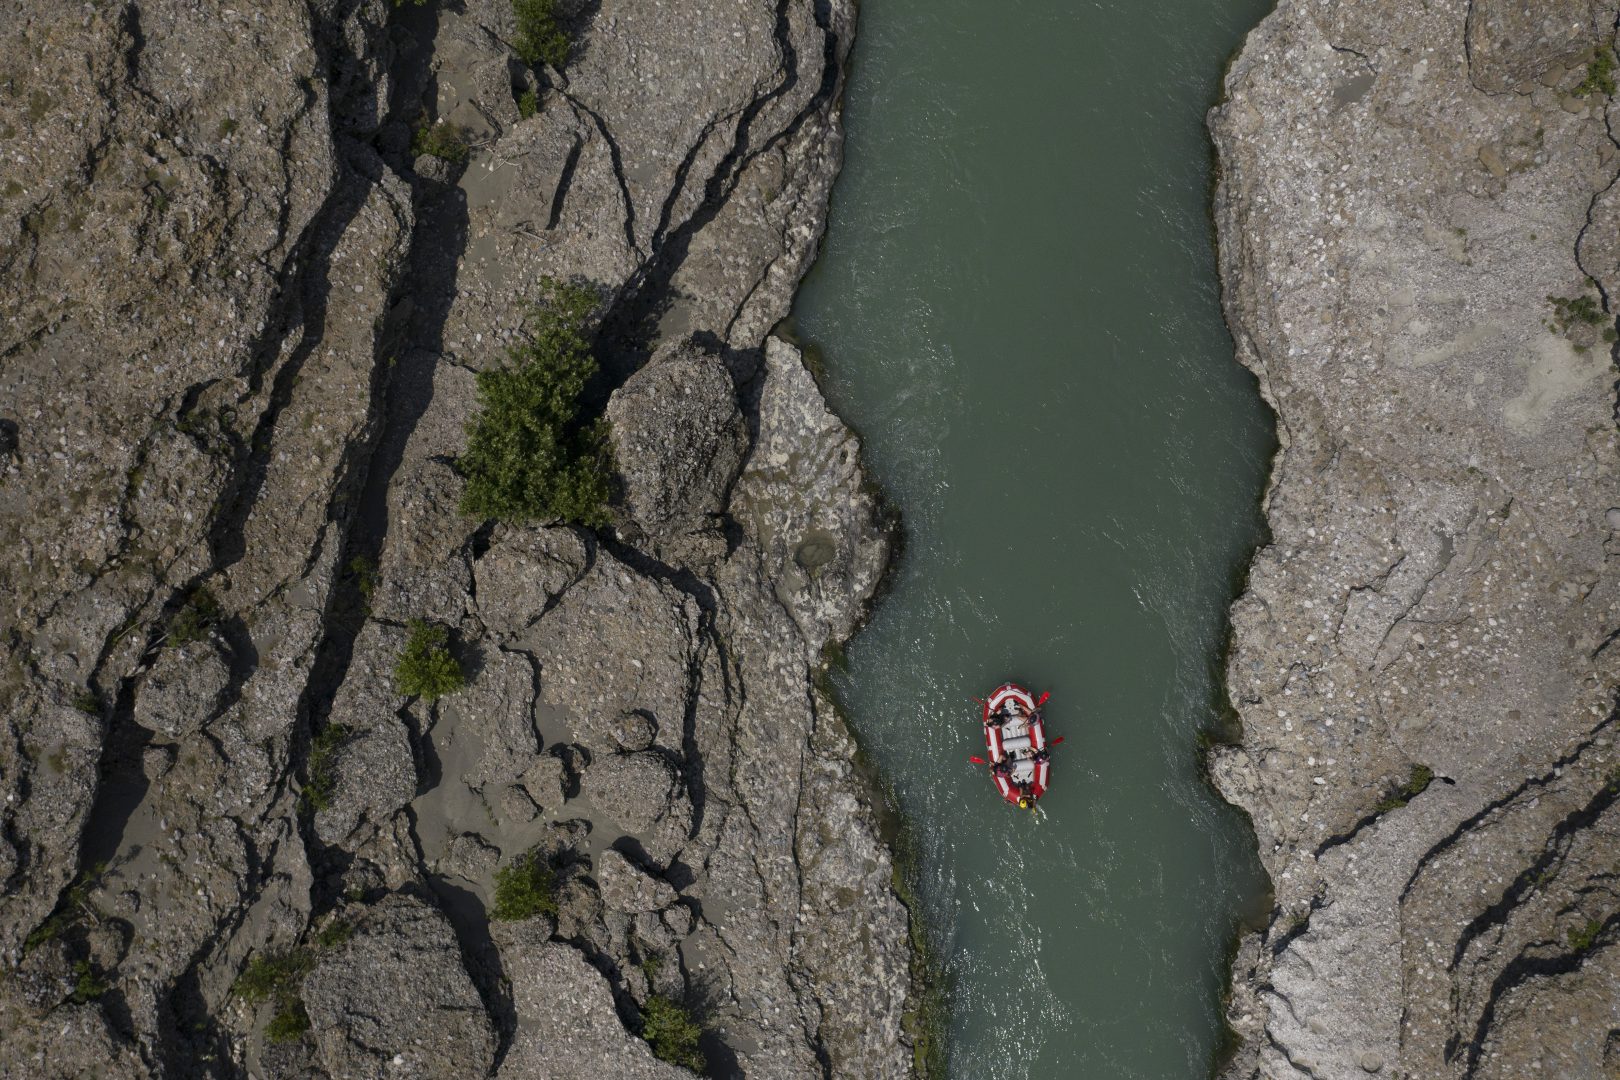 In this June 25, 2019 photo, people raft on the Vjosa River near Permet, Albania. Some tout hydropower as a reliable, cheap and renewable energy source that helps curb dependence on planet-warming fossil fuels like coal, oil and natural gas. But some critics like EcoAlbania say the benefits of hydropower are overstated _ and outweighed by the harm dams can do.